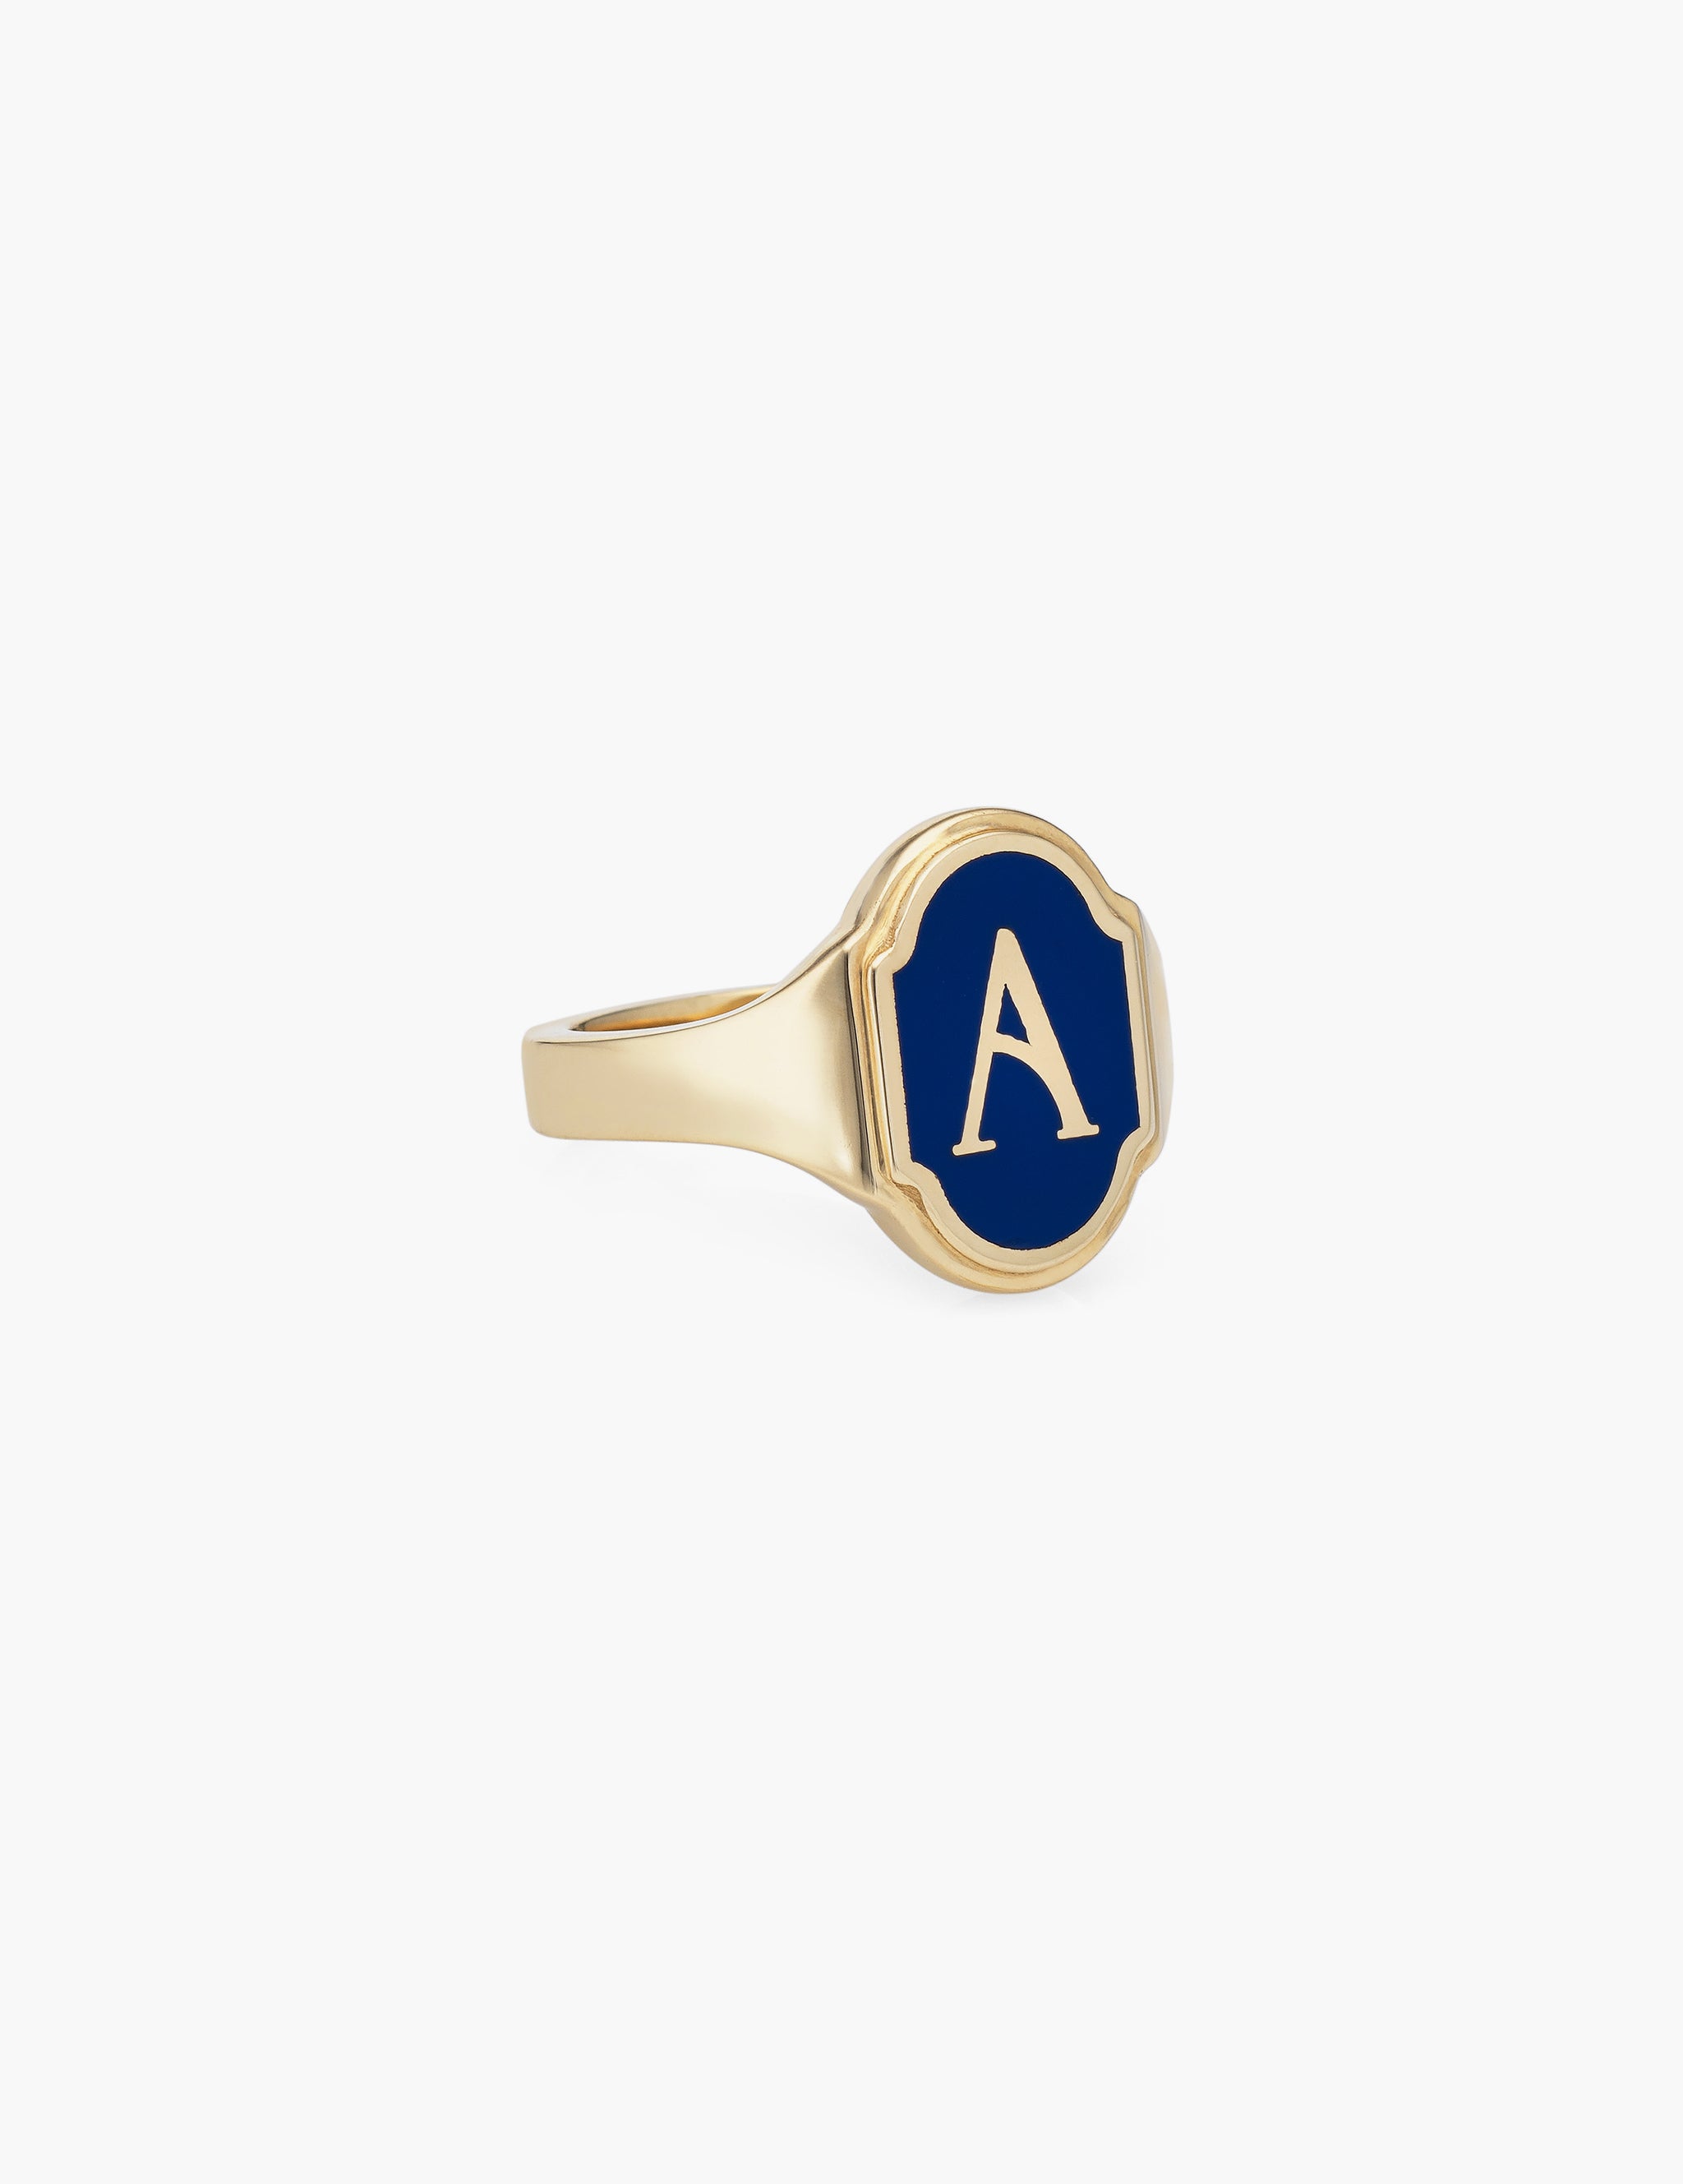 Gold Initial Ring, Custom Initial Ring, Letter Ring, Initial Jewelry, Monogram  Ring, Initial Signet Ring, Alphabet Ring, Initial S Ring - Etsy | Gold  initial ring, Personalized gold rings, Initial ring